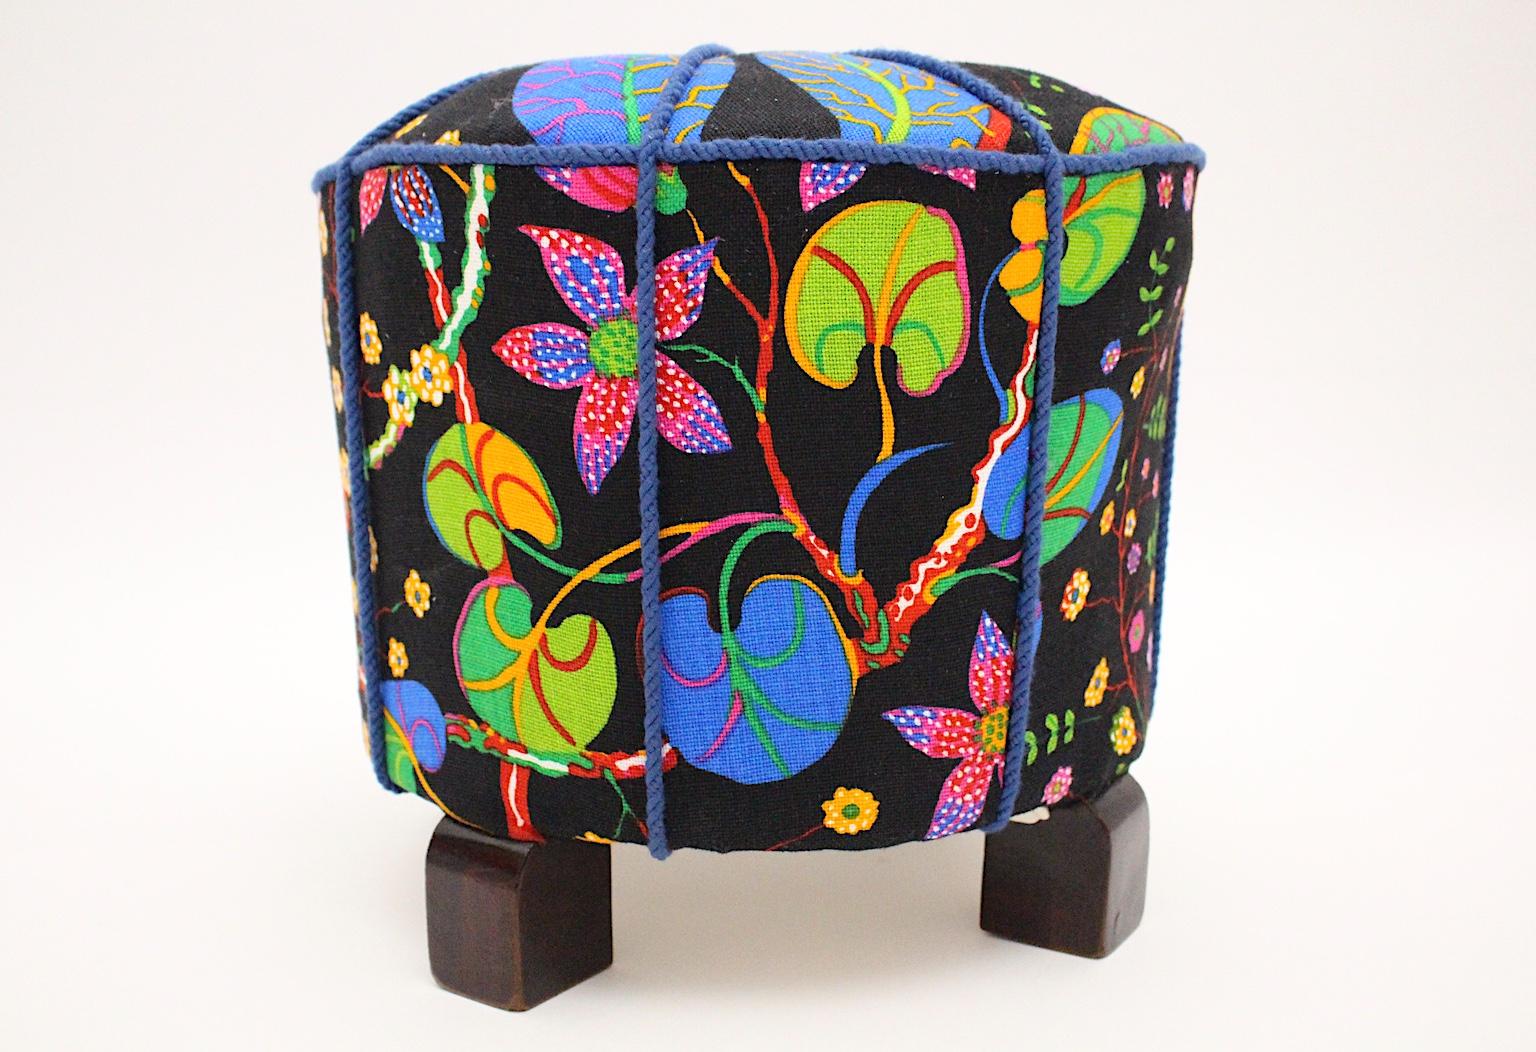 Mid-20th Century Art Deco Vintage Beech Pouf or Stool with Josef Frank Fabric, 1930s, Austria For Sale